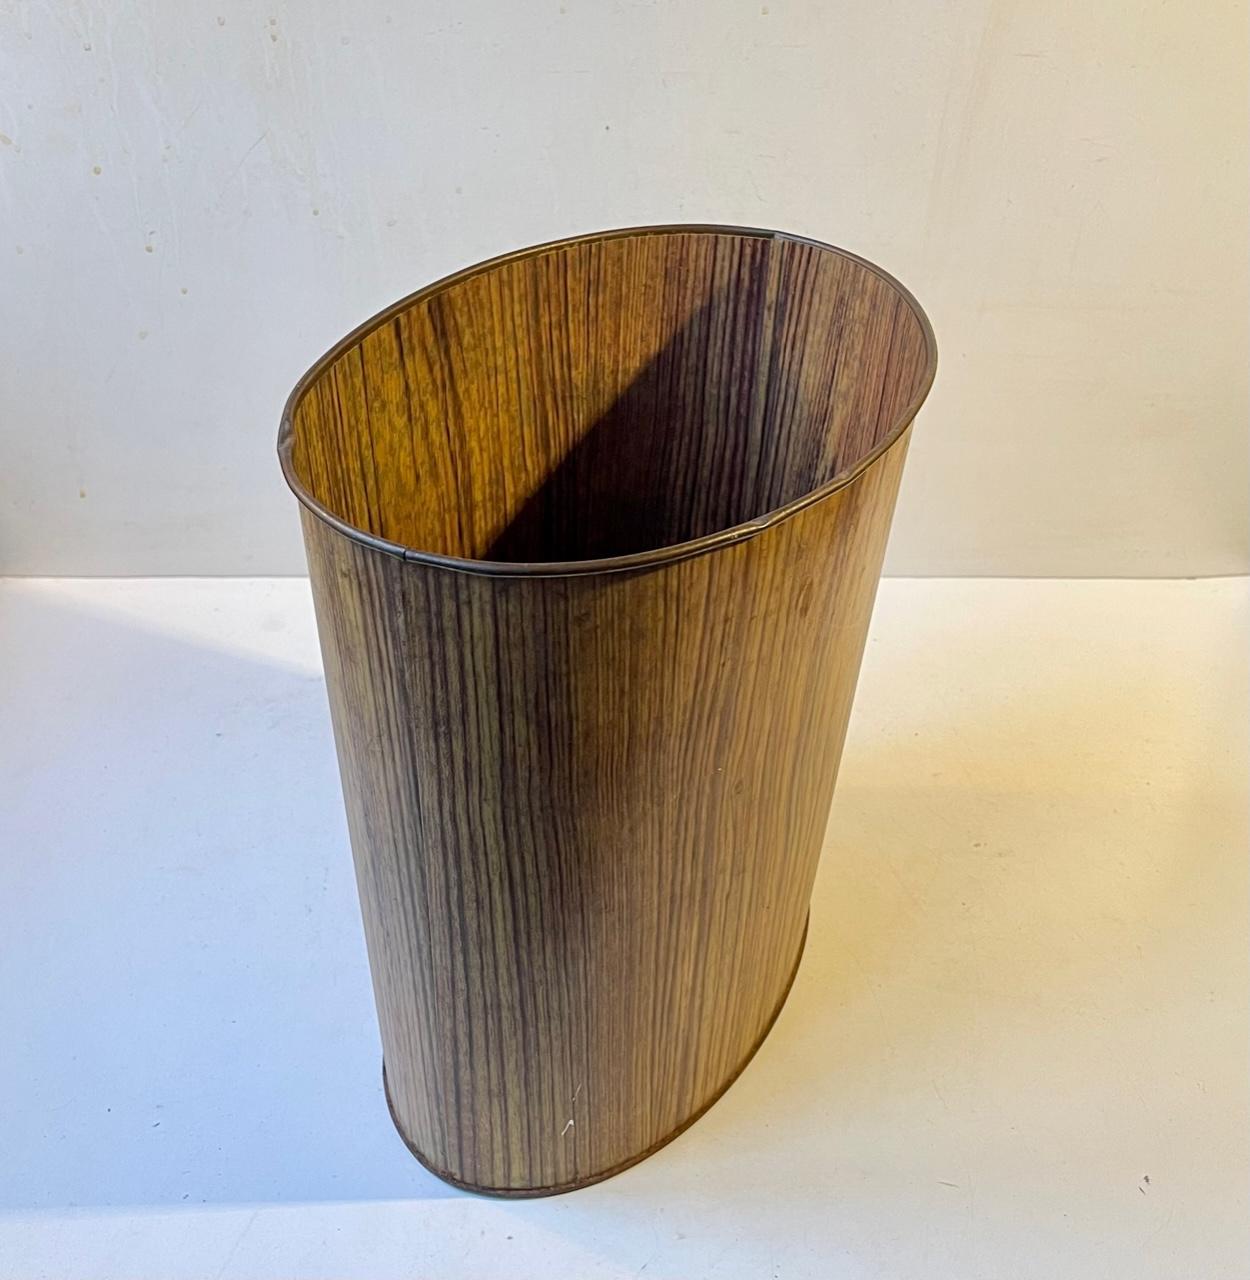 A rare oval trash can for paper/desk litter. Its made from Tin-plate covered by a faux oak foil. Made by Ira in Denmark circa 1960. Measurements: H: 28.5 cm, W: 27.5, D: 19 cm.